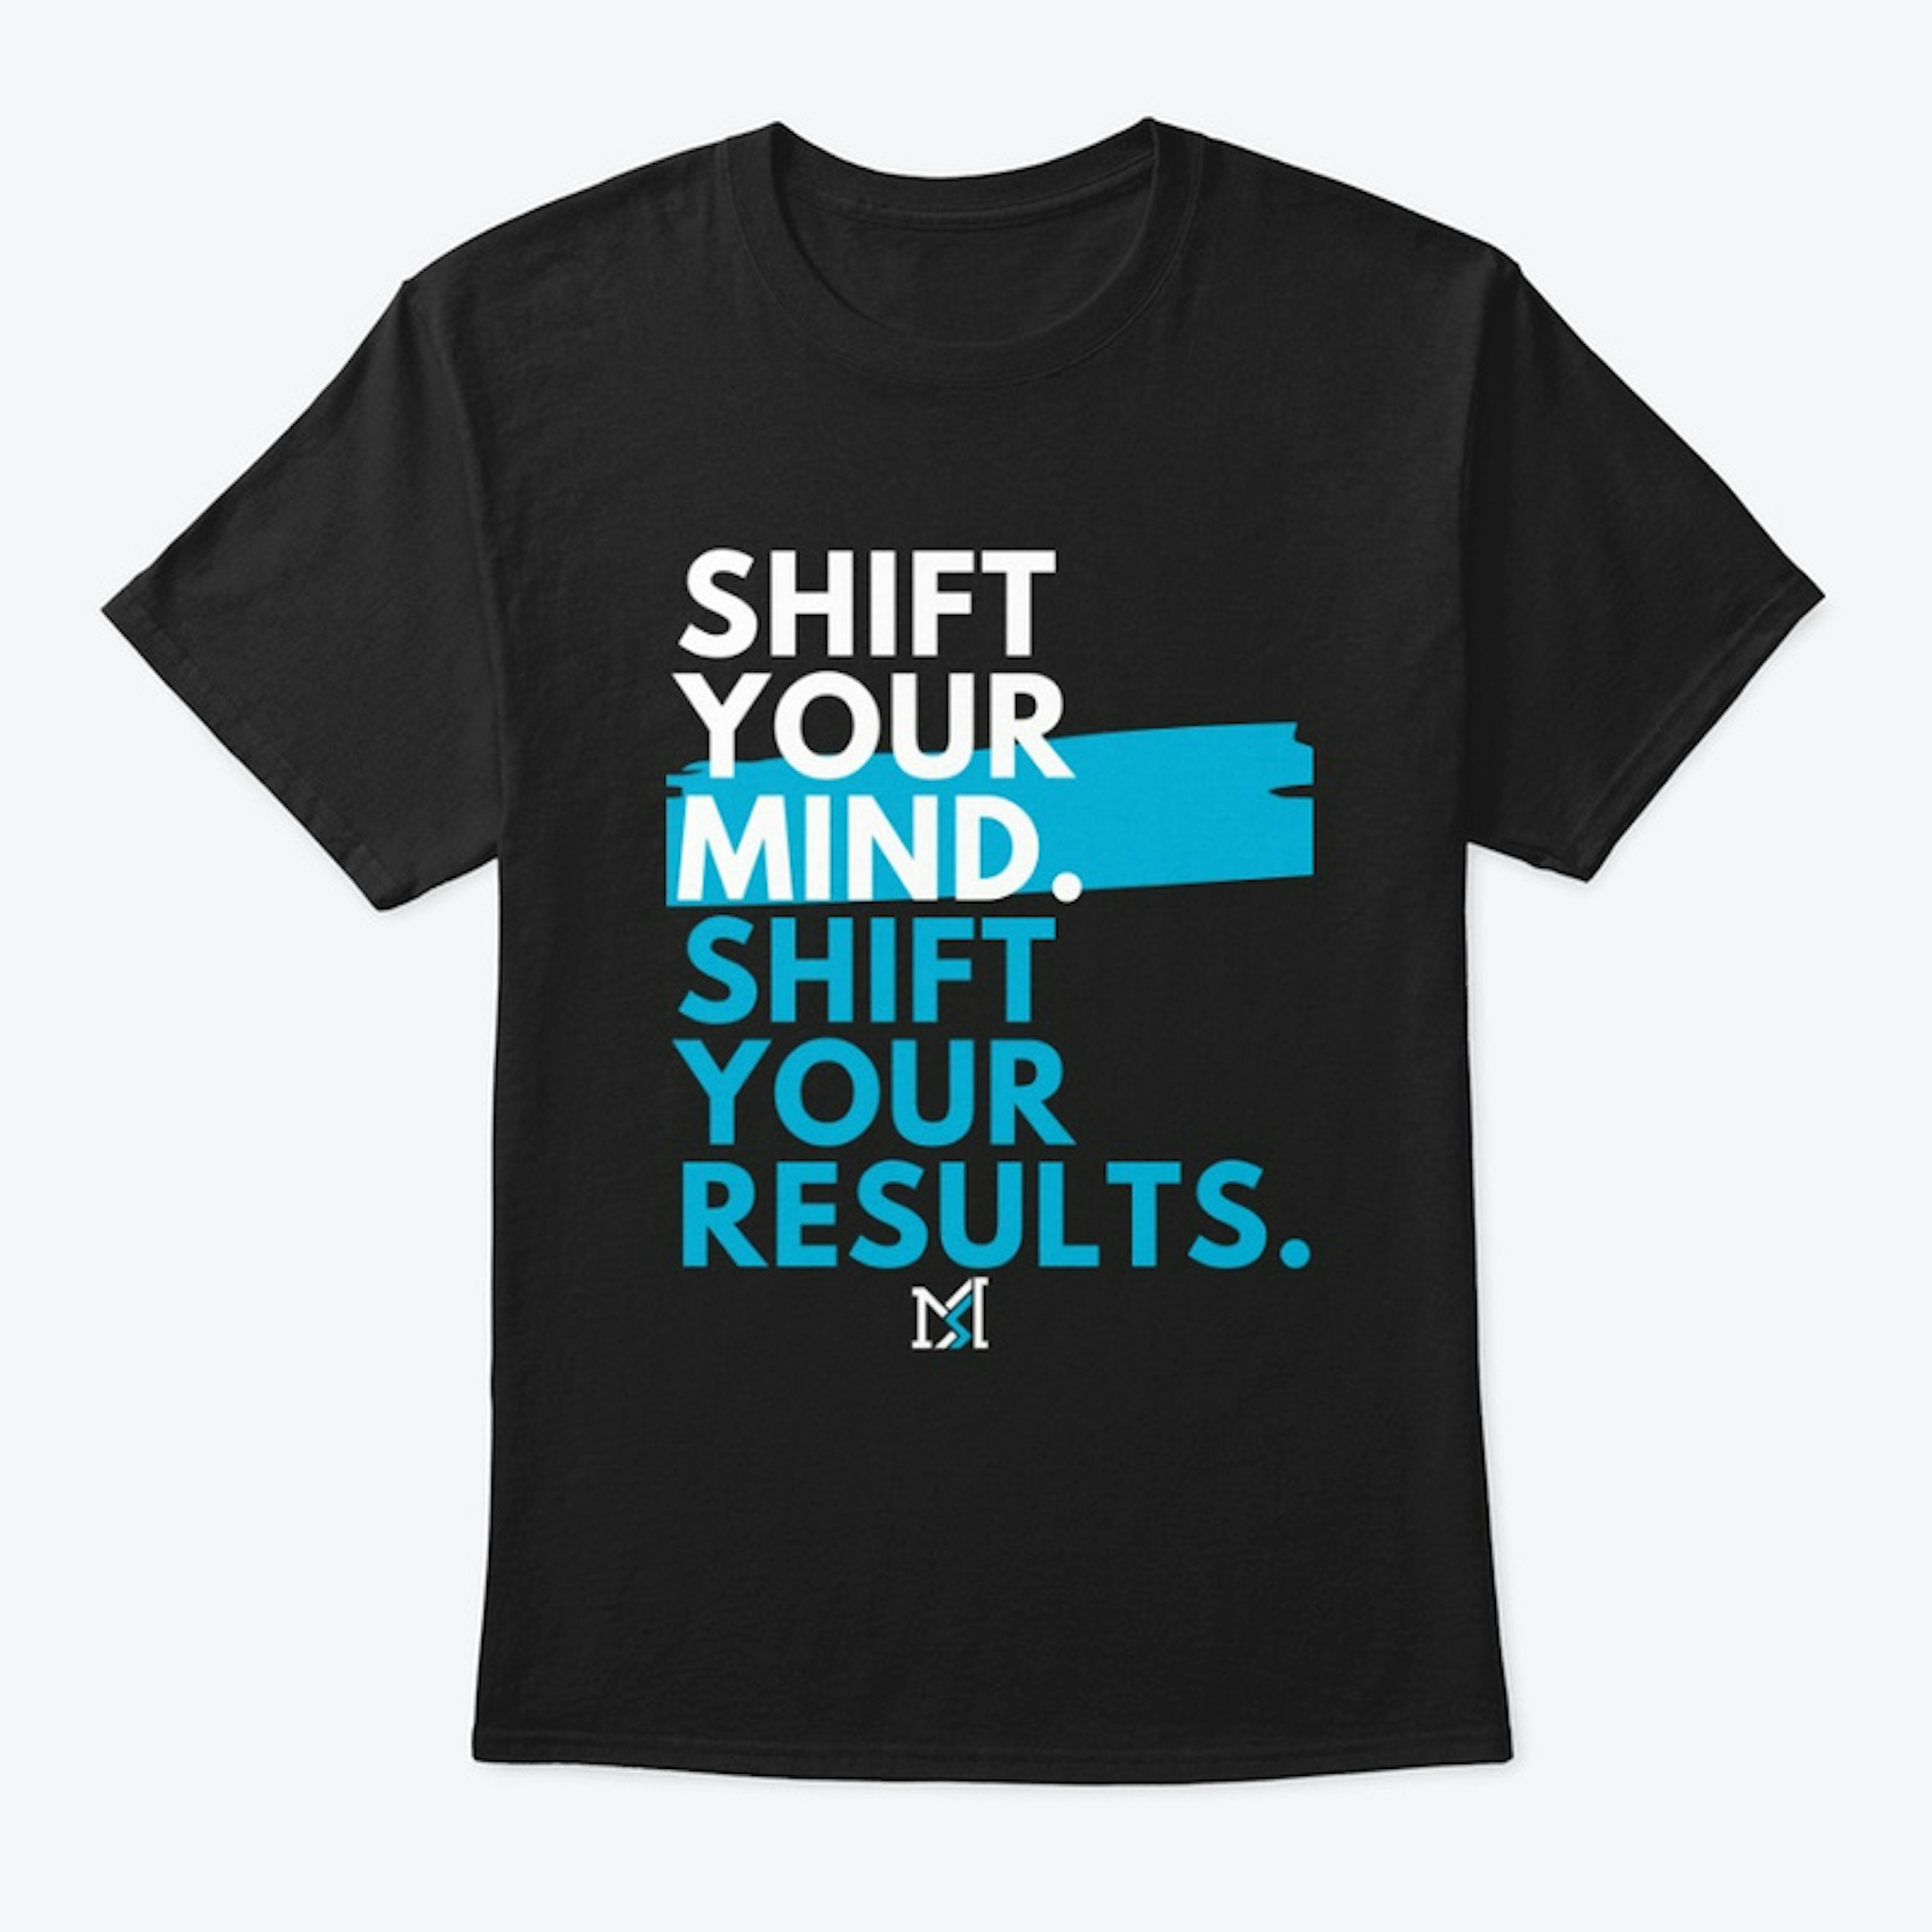 Shift your mind- Black Tee 